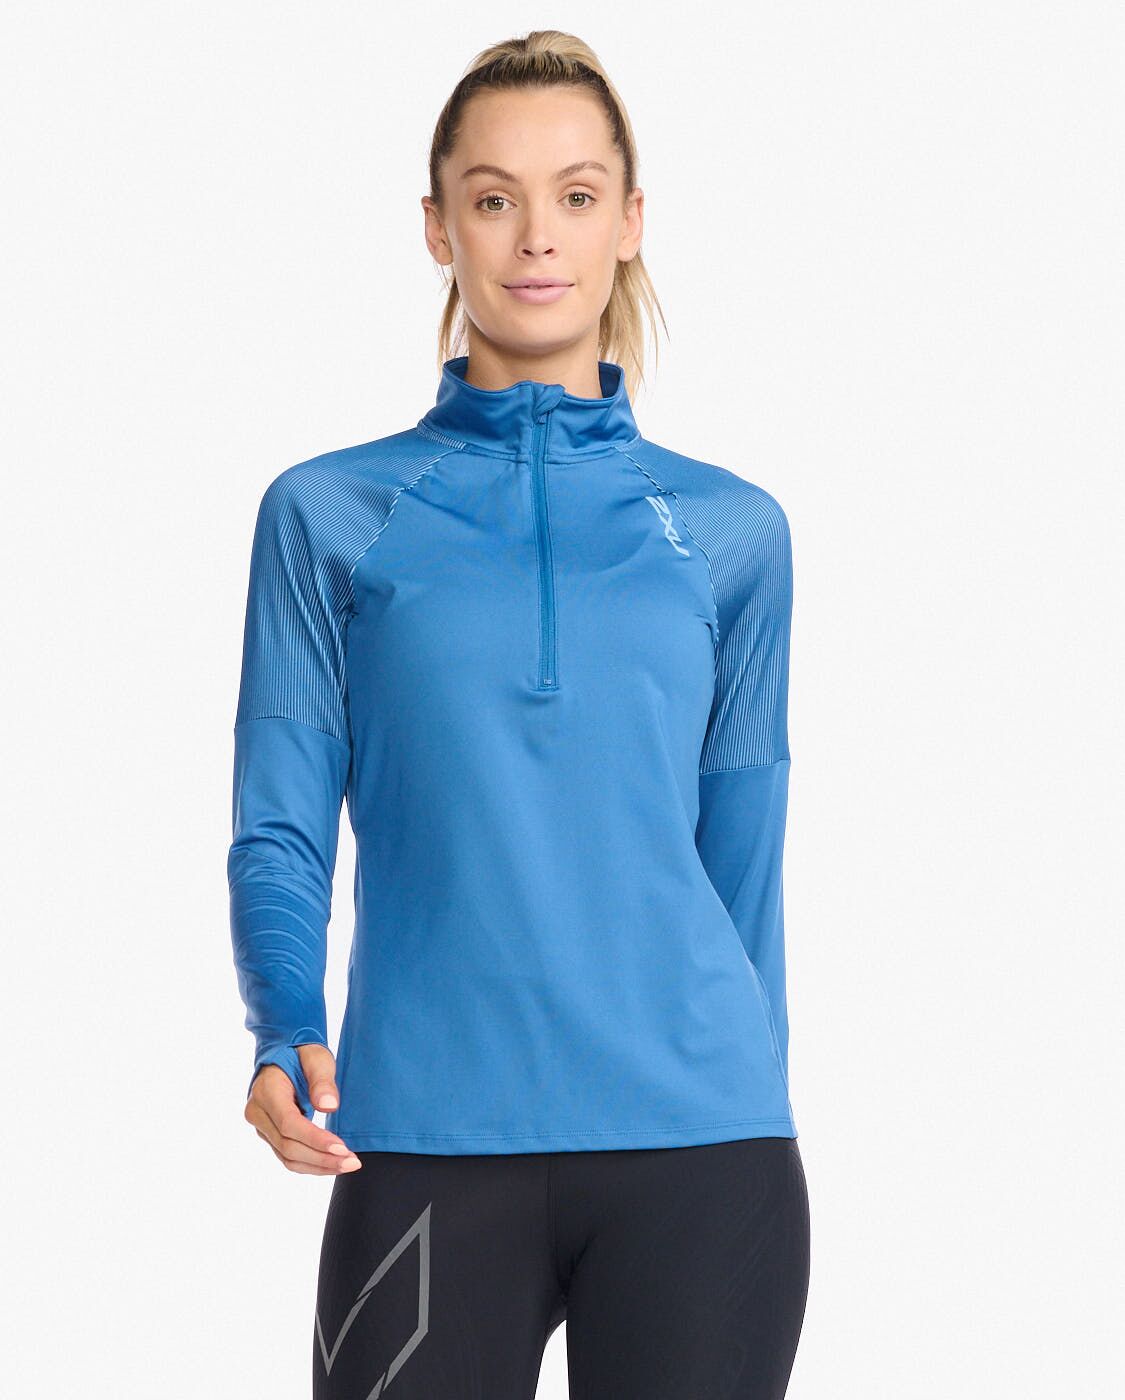 2XU South Africa - Womens Light Speed L/S 1/2 Zip - Starling - Starling/Mirage Reflective